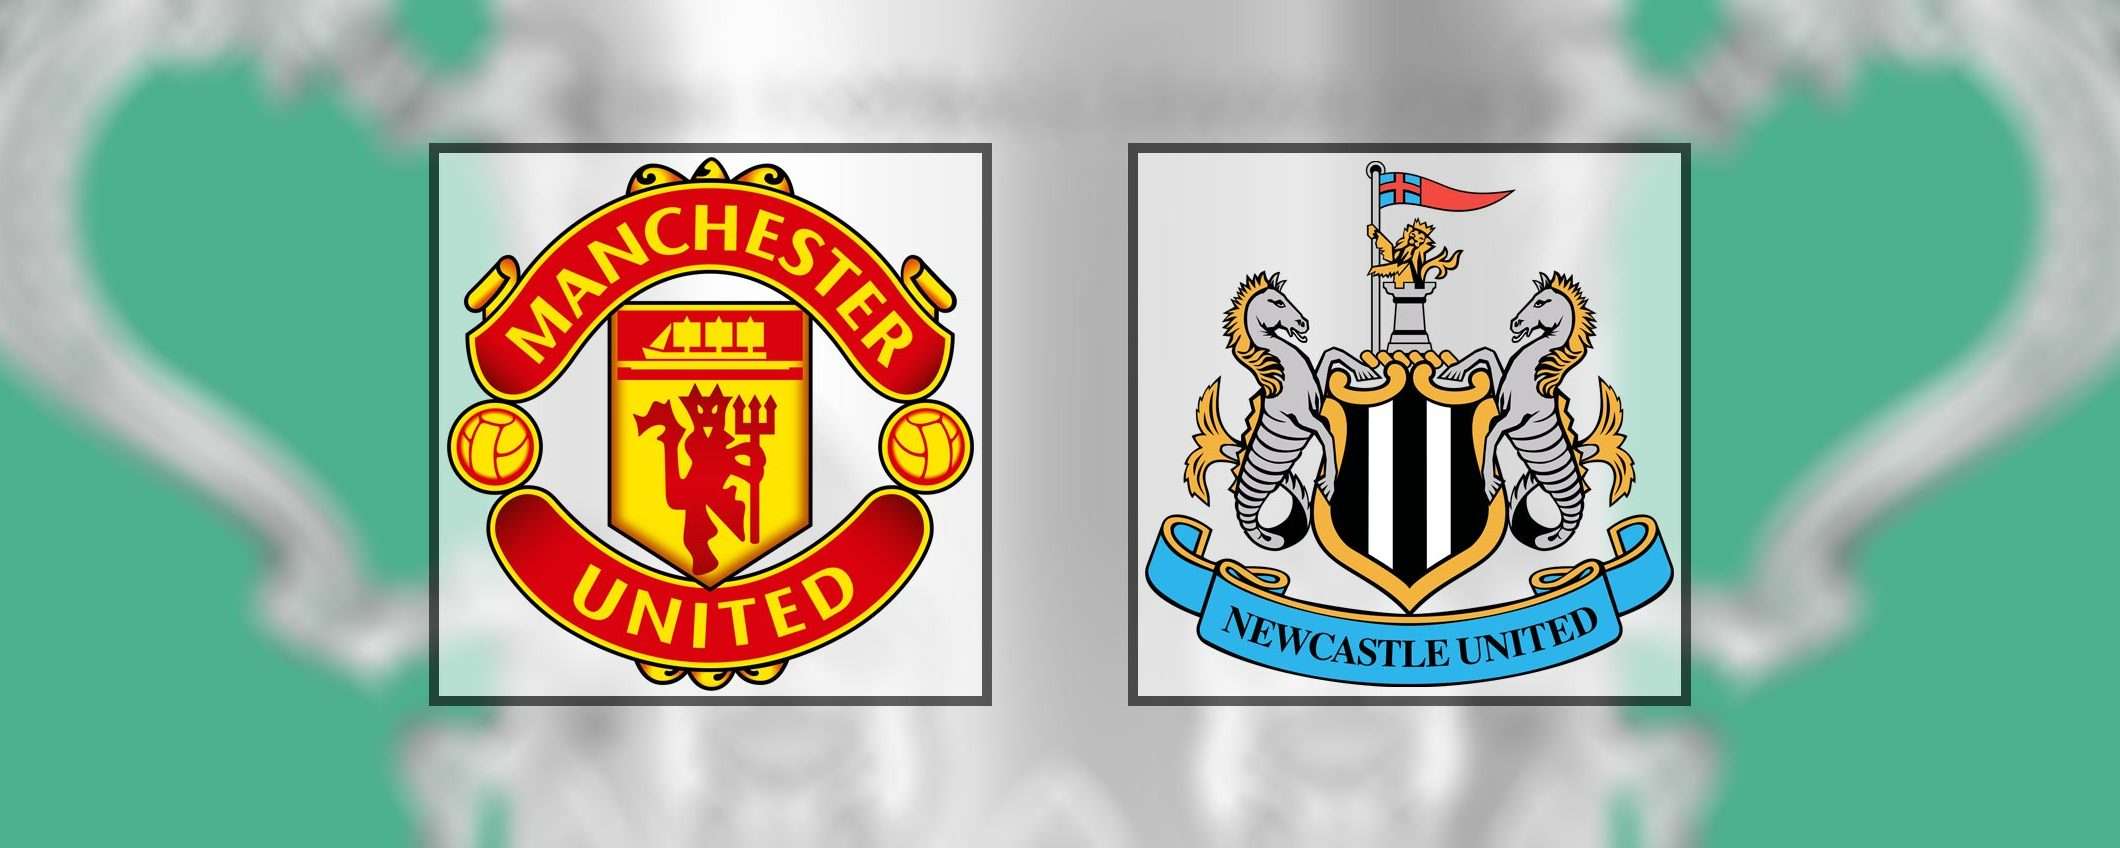 Come vedere Manchester UTD-Newcastle in streaming (Carabao Cup)